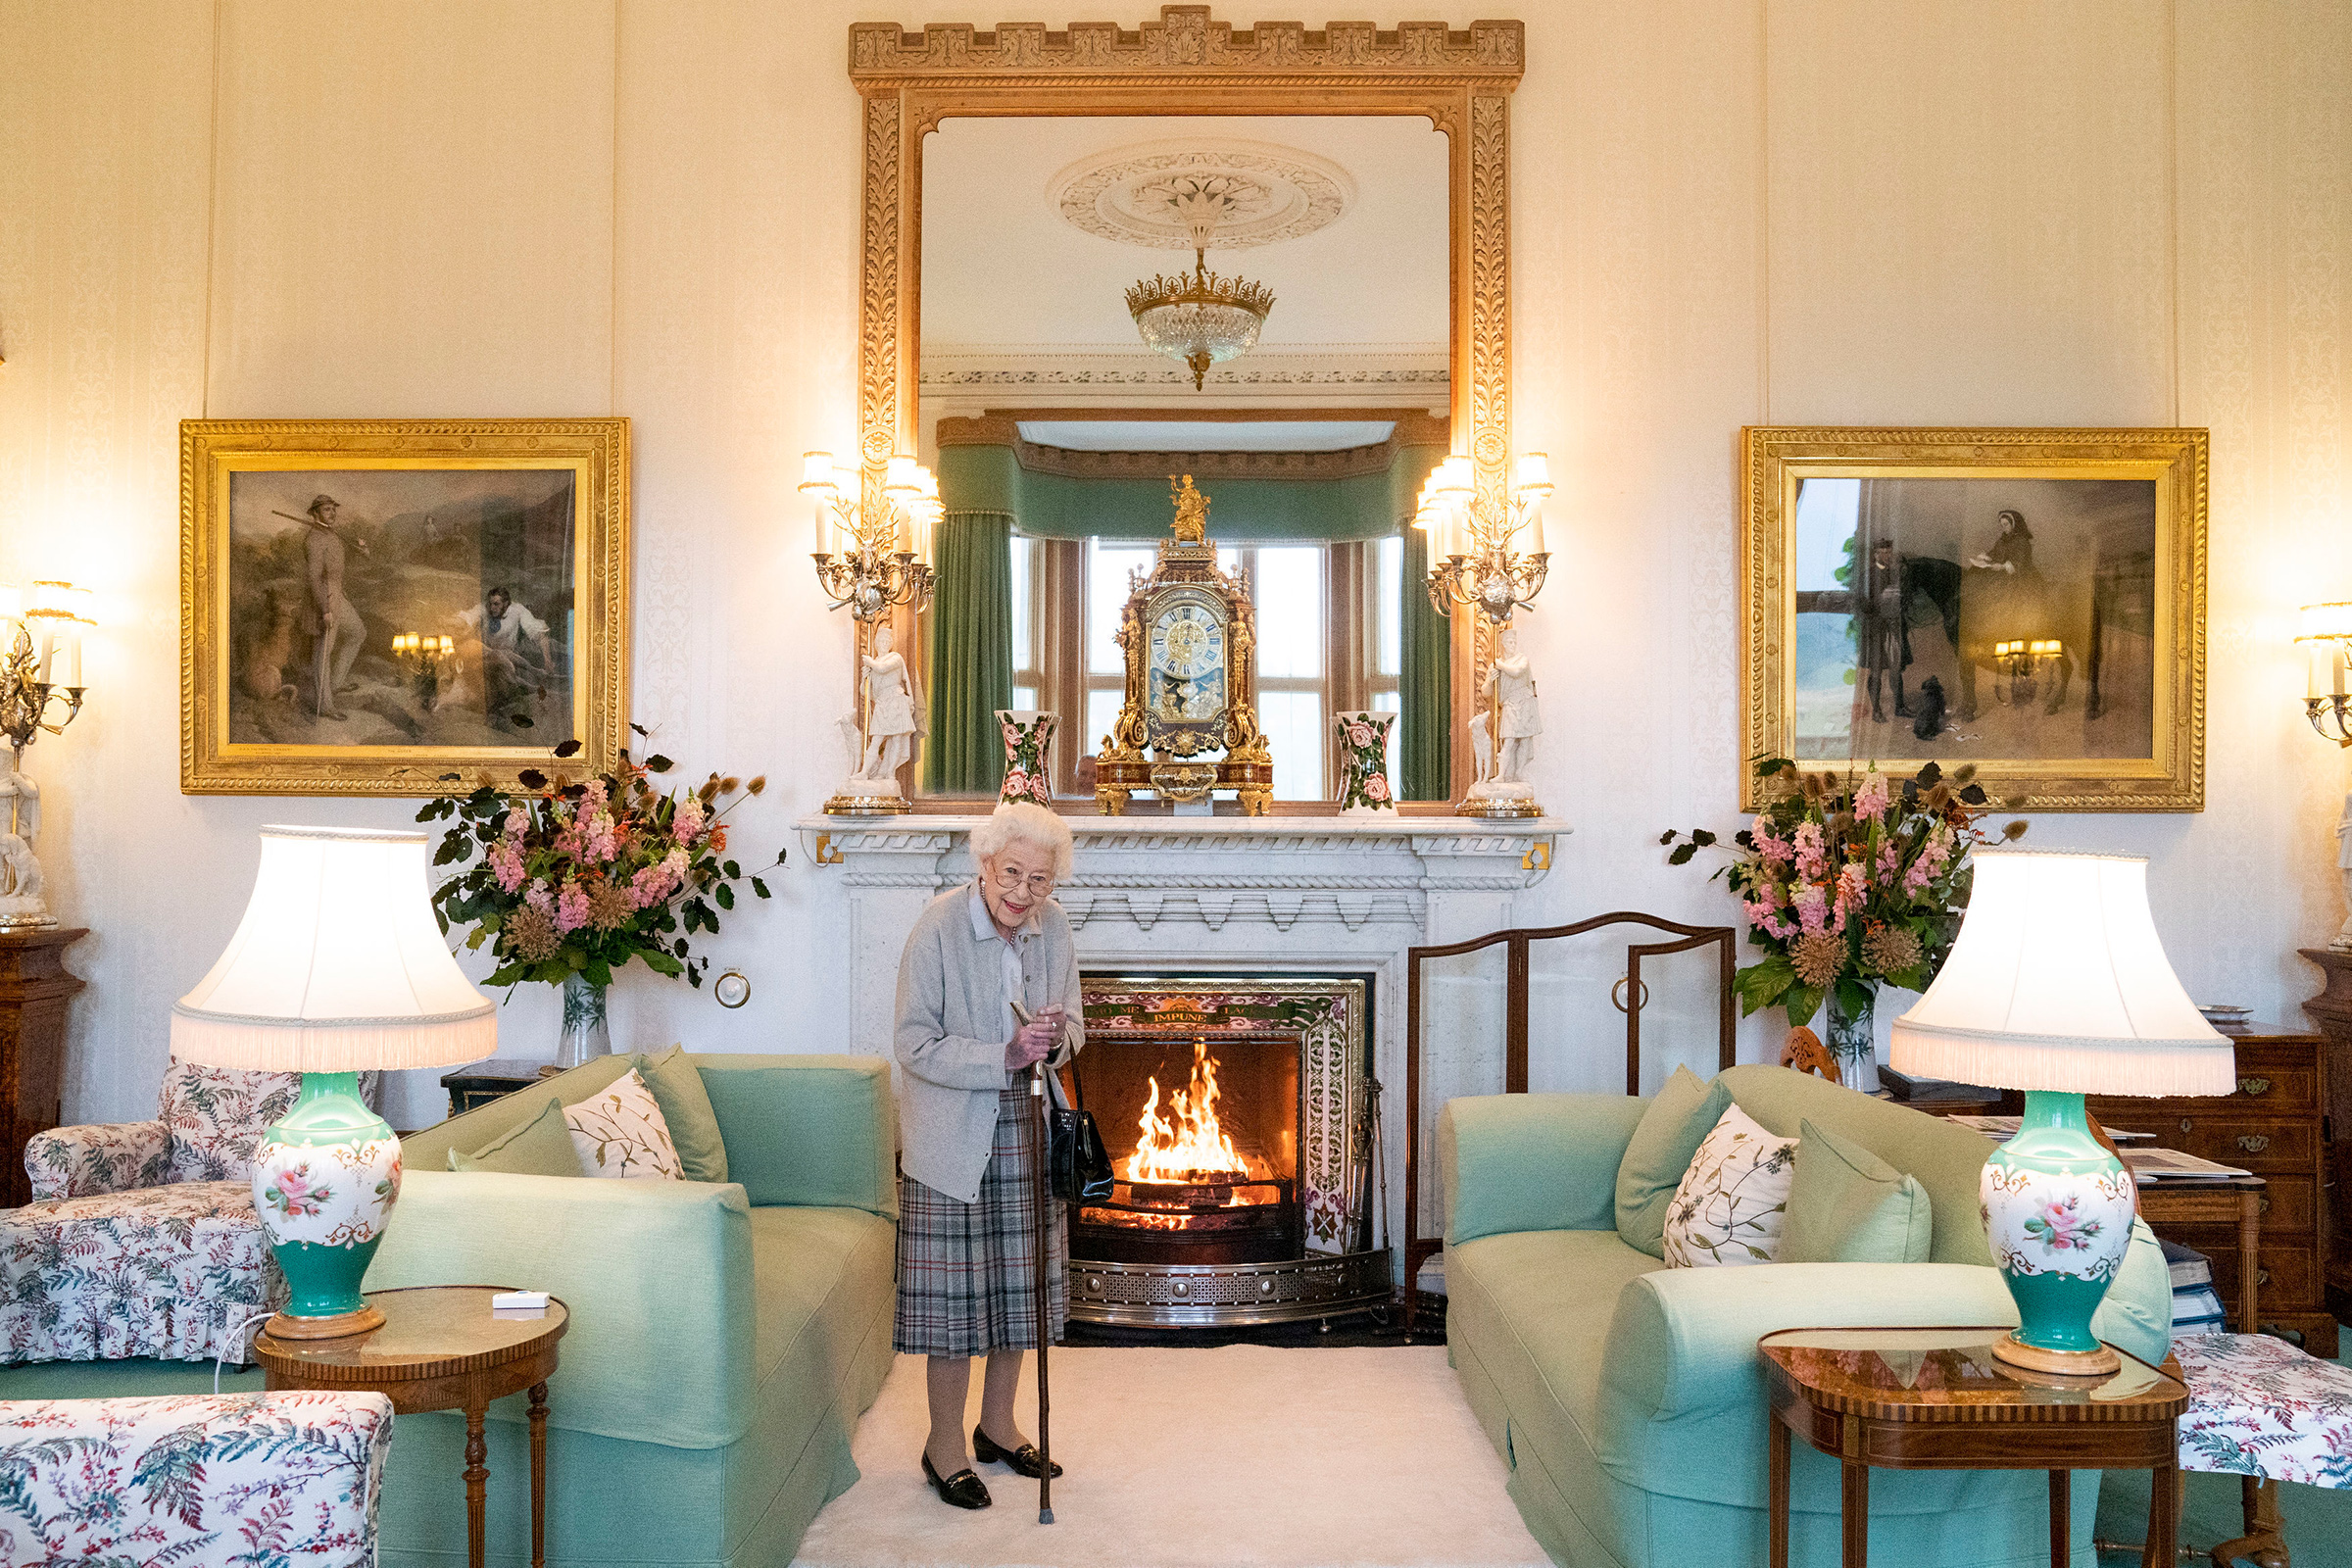 Britain's Queen Elizabeth II waits in the Drawing Room before receiving Liz Truss for an audience at Balmoral, where Truss was be invited to become Prime Minister and form a new government, in Aberdeenshire, Scotland, on Sept. 6, 2022. (Jane Barlow—Pool Photo/AP)